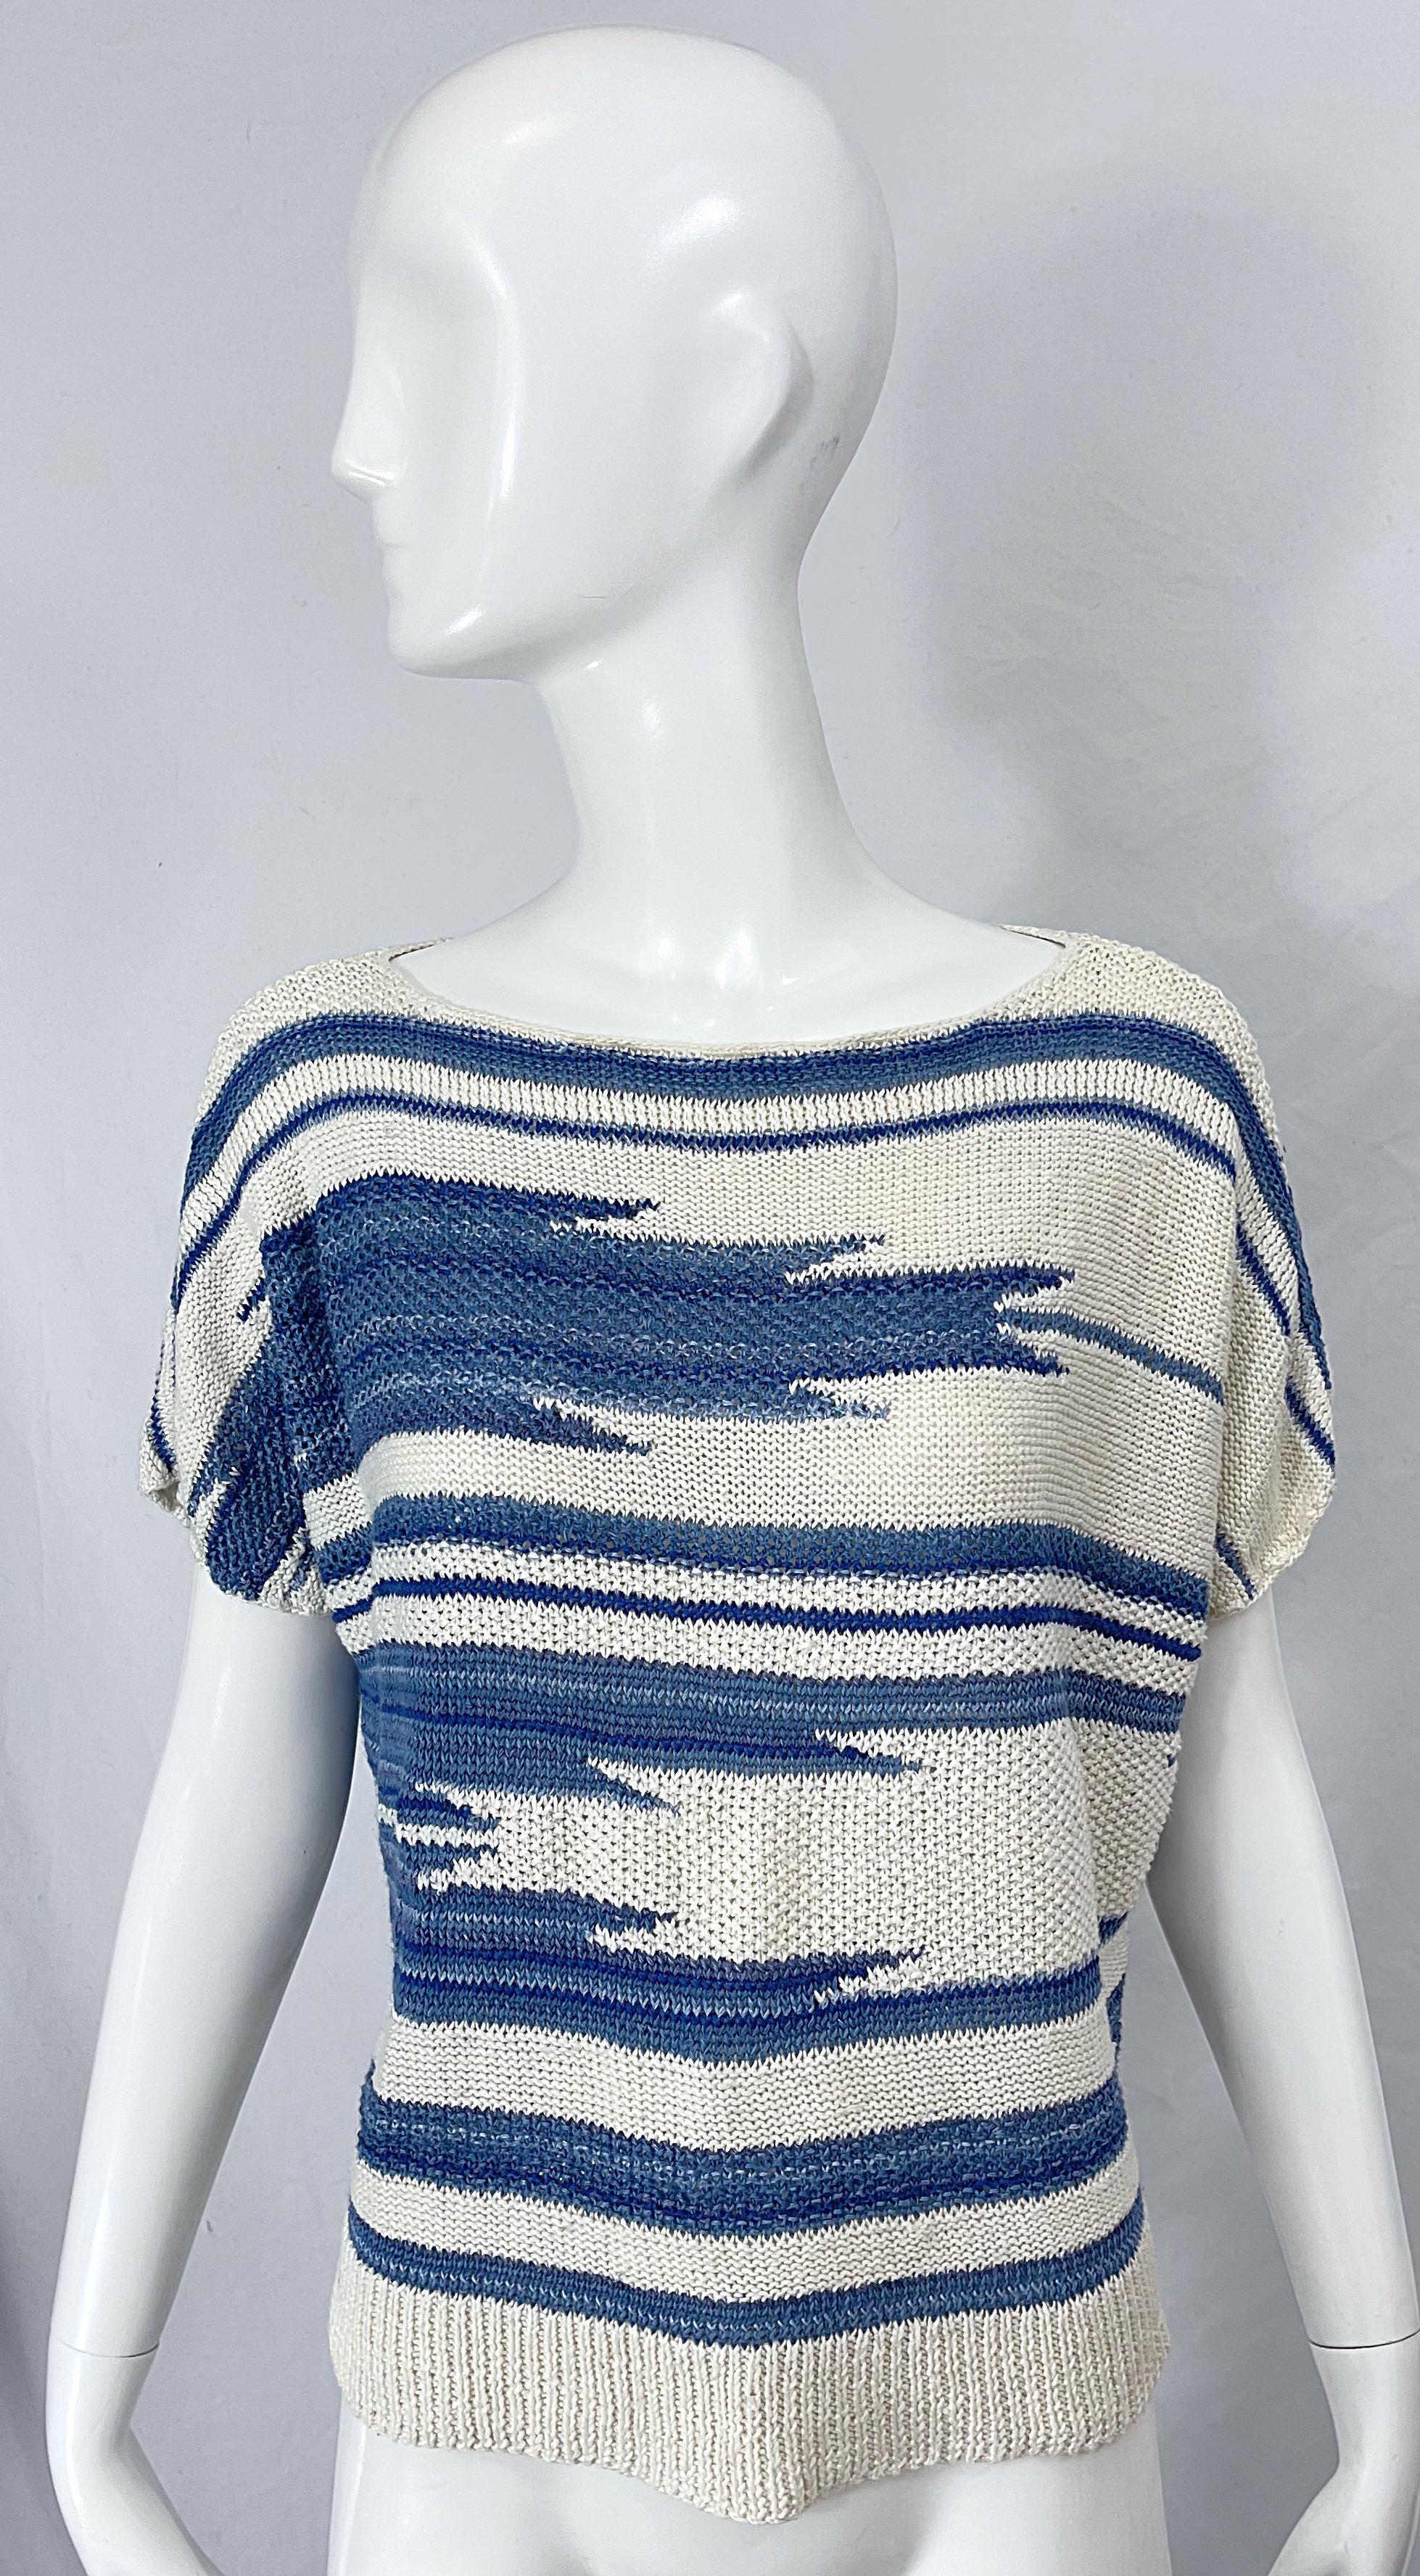 Late 90s RALPH LAUREN black label linen and silk knit ikat print short sleeve top ! Features blue and white ikat / southwest prints throughout. Soft fabric with lots of stretch. Dolman sleeves make this easy to wear for an array of sizes. 
In great